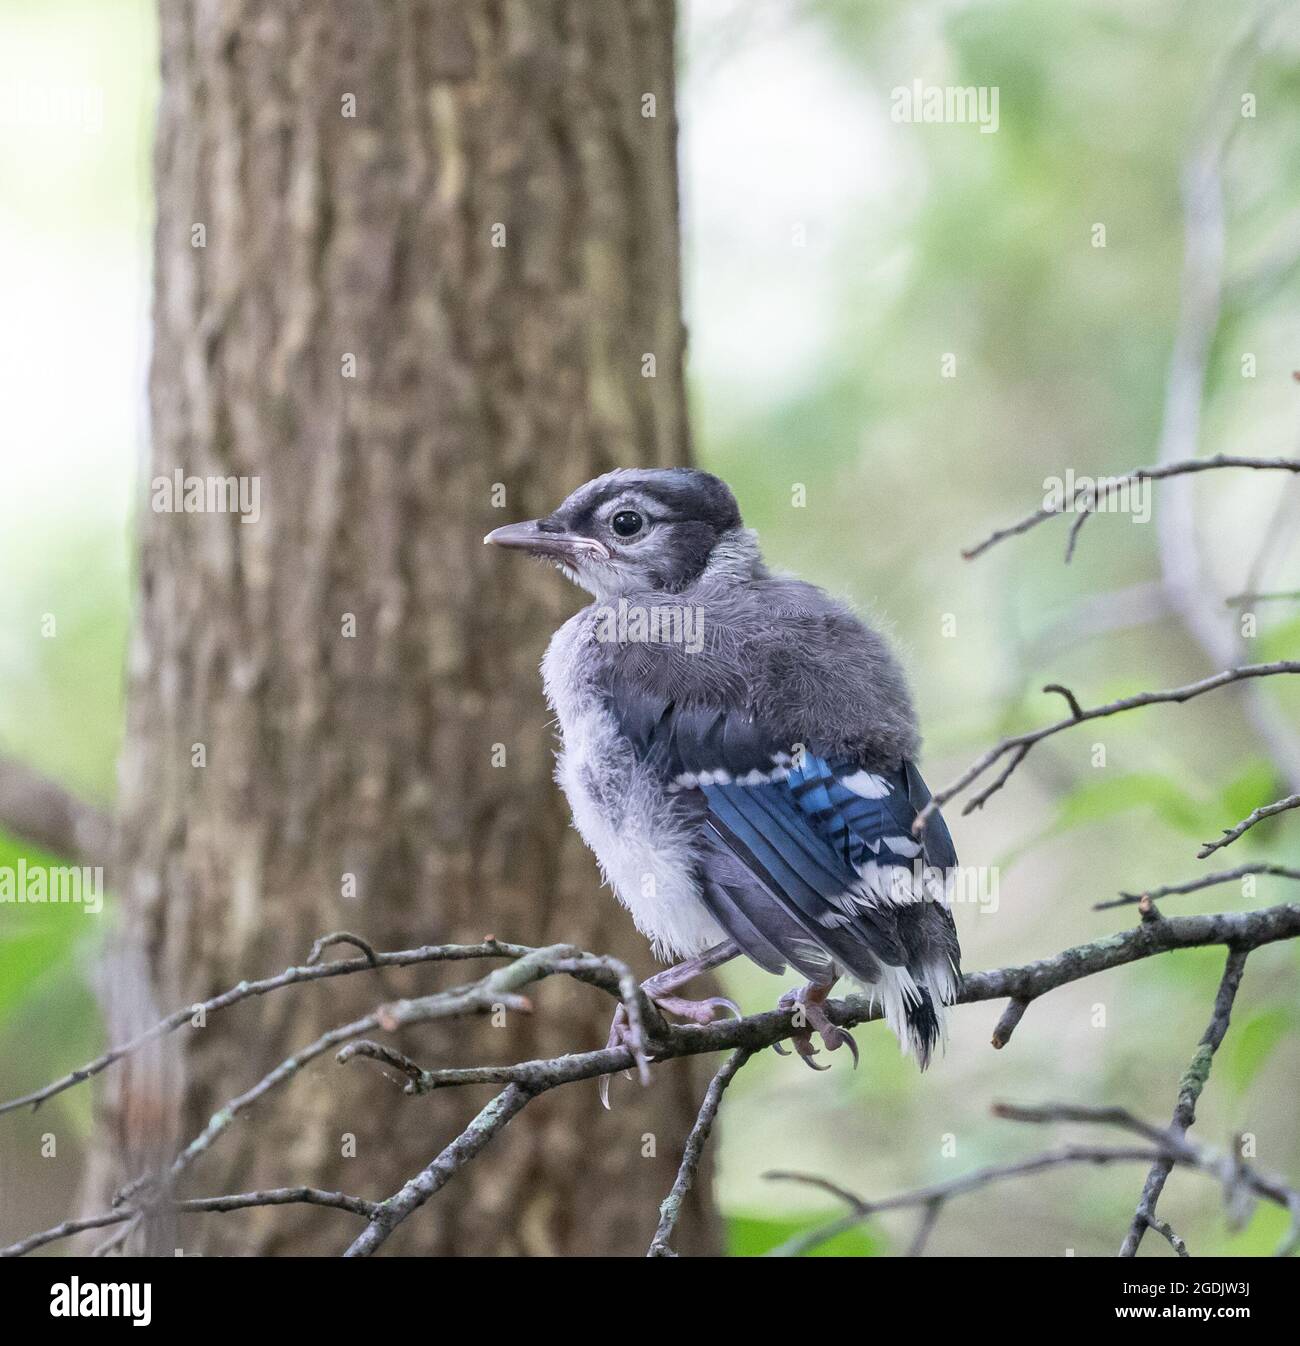 Bluejay Fledgling perched on branch. Stock Photo